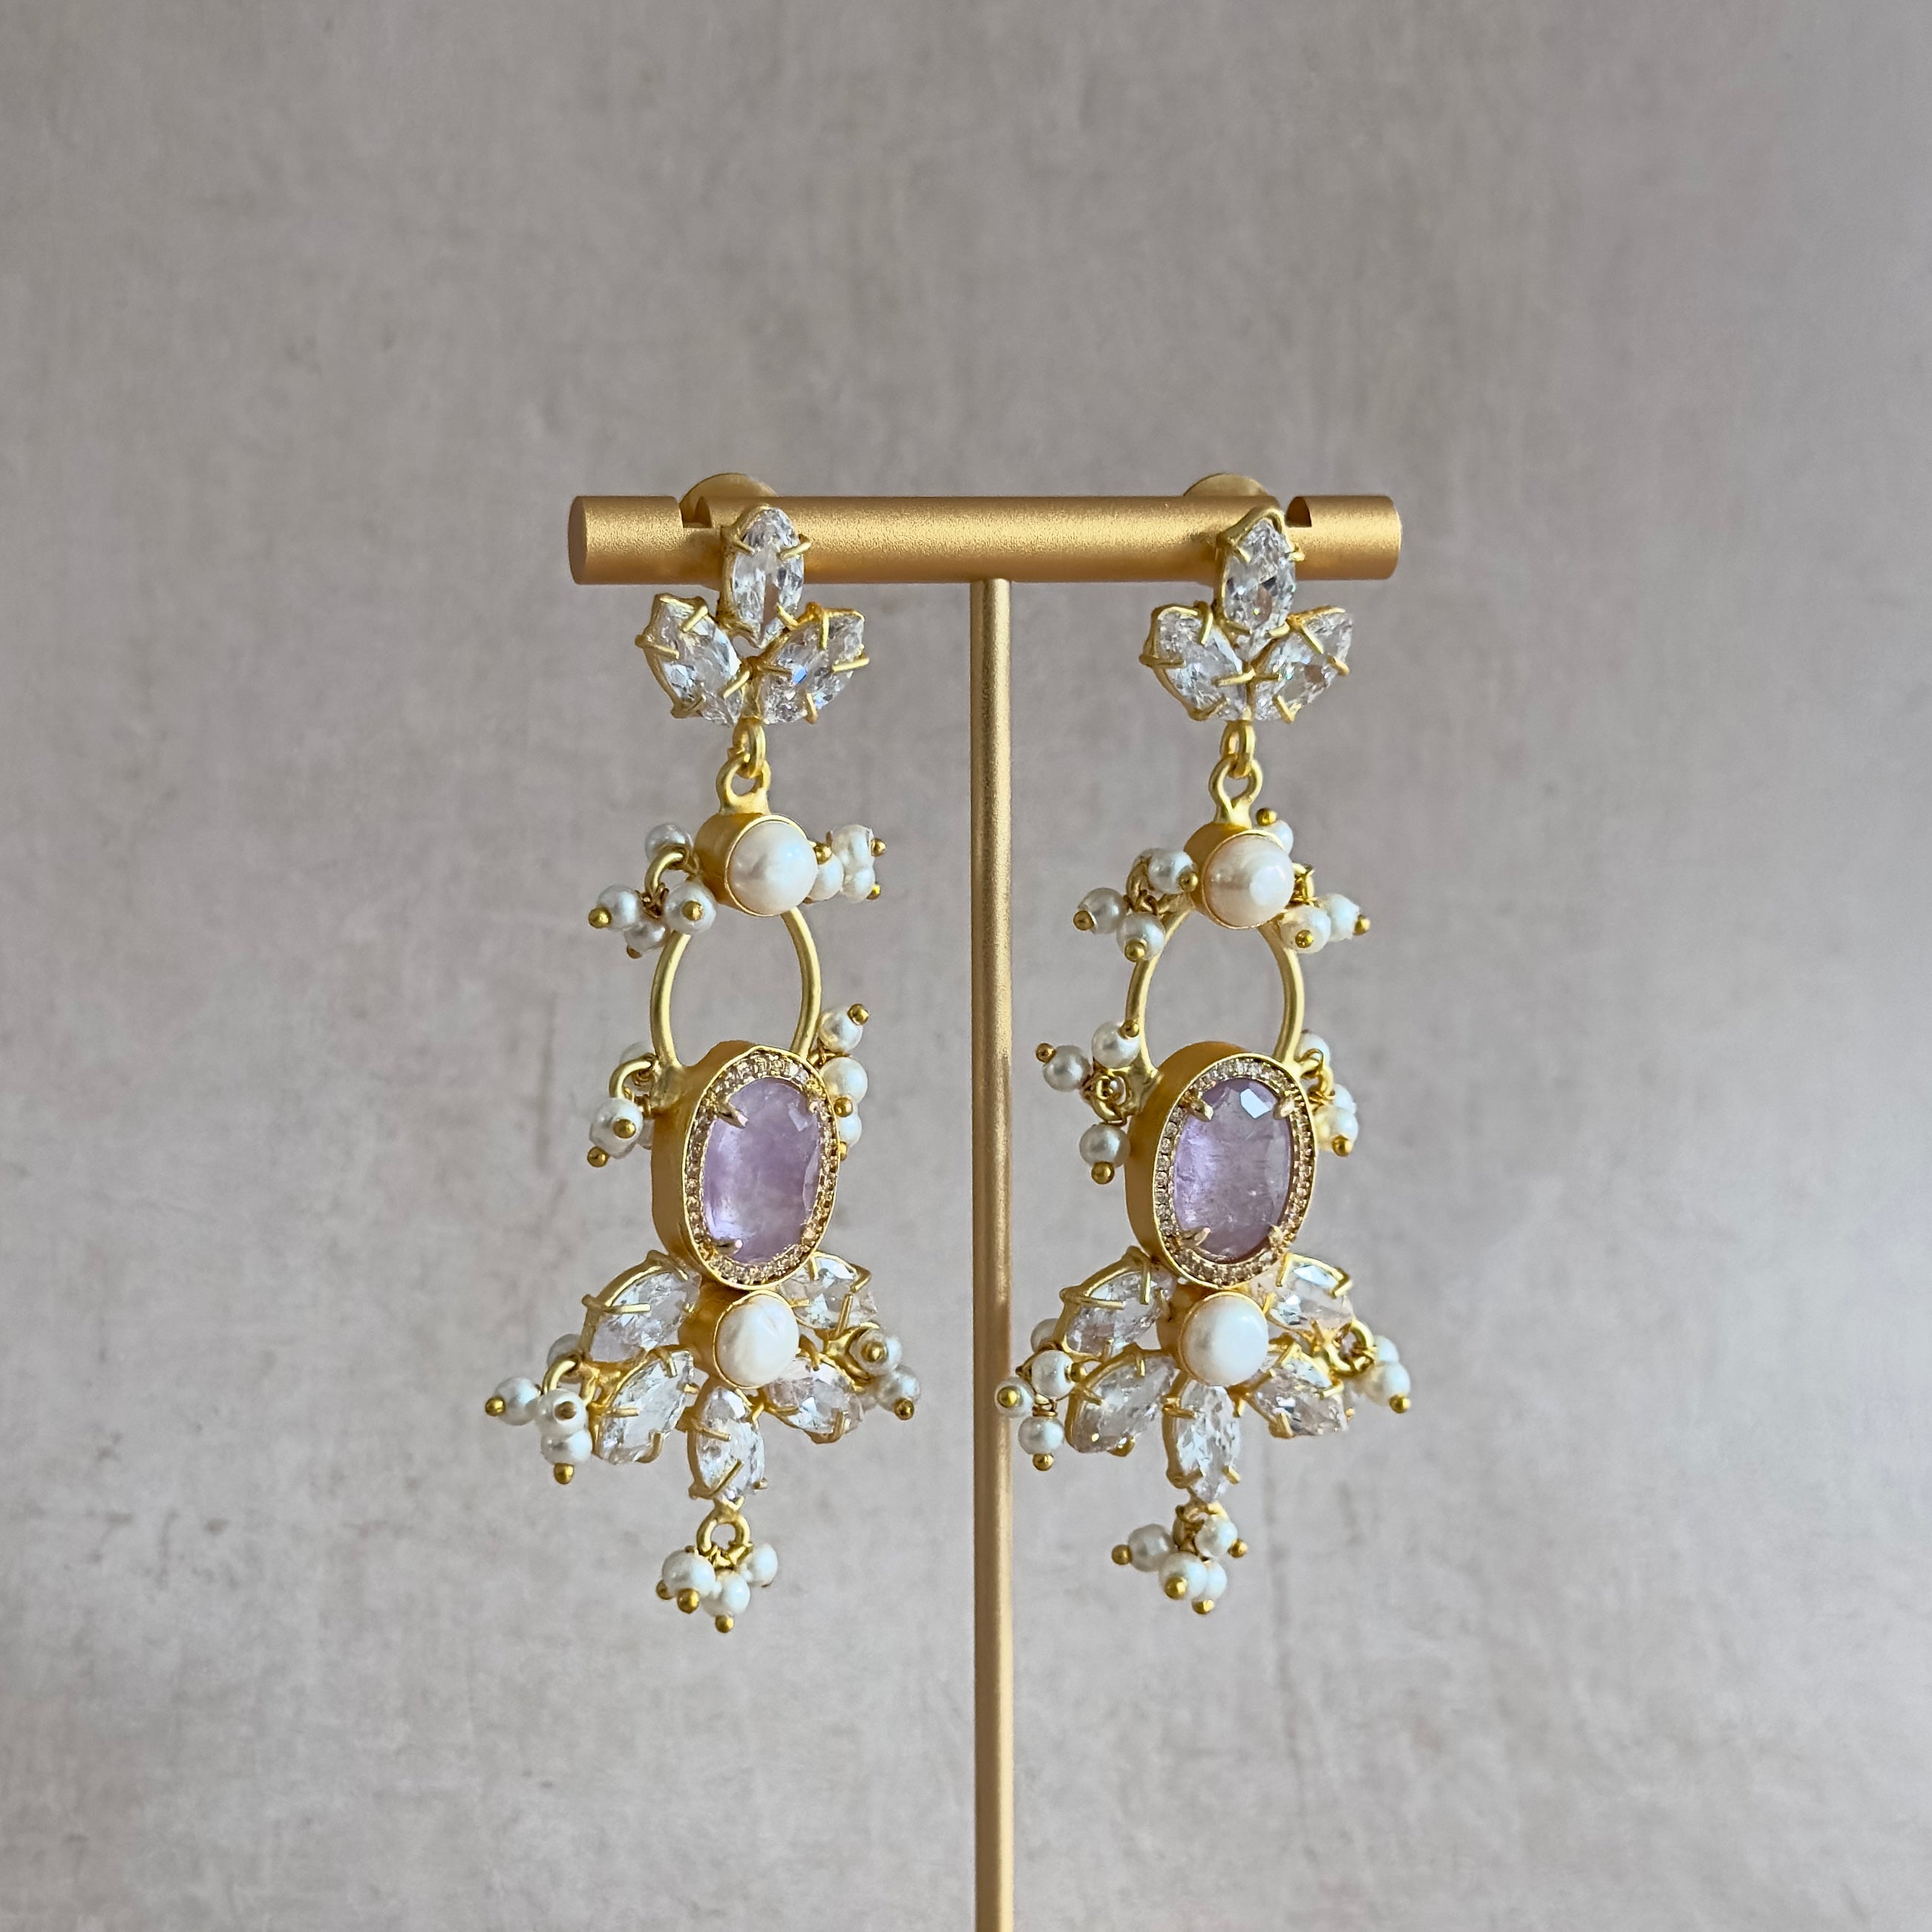 Indulge in pure elegance with our Sloane Lilac Crystal Drop Earrings. These stunning earrings are adorned with delicate lilac crystals, sparkling CZ crystals, and lustrous freshwater pearls. Elevate any outfit and turn heads with these statement earrings.